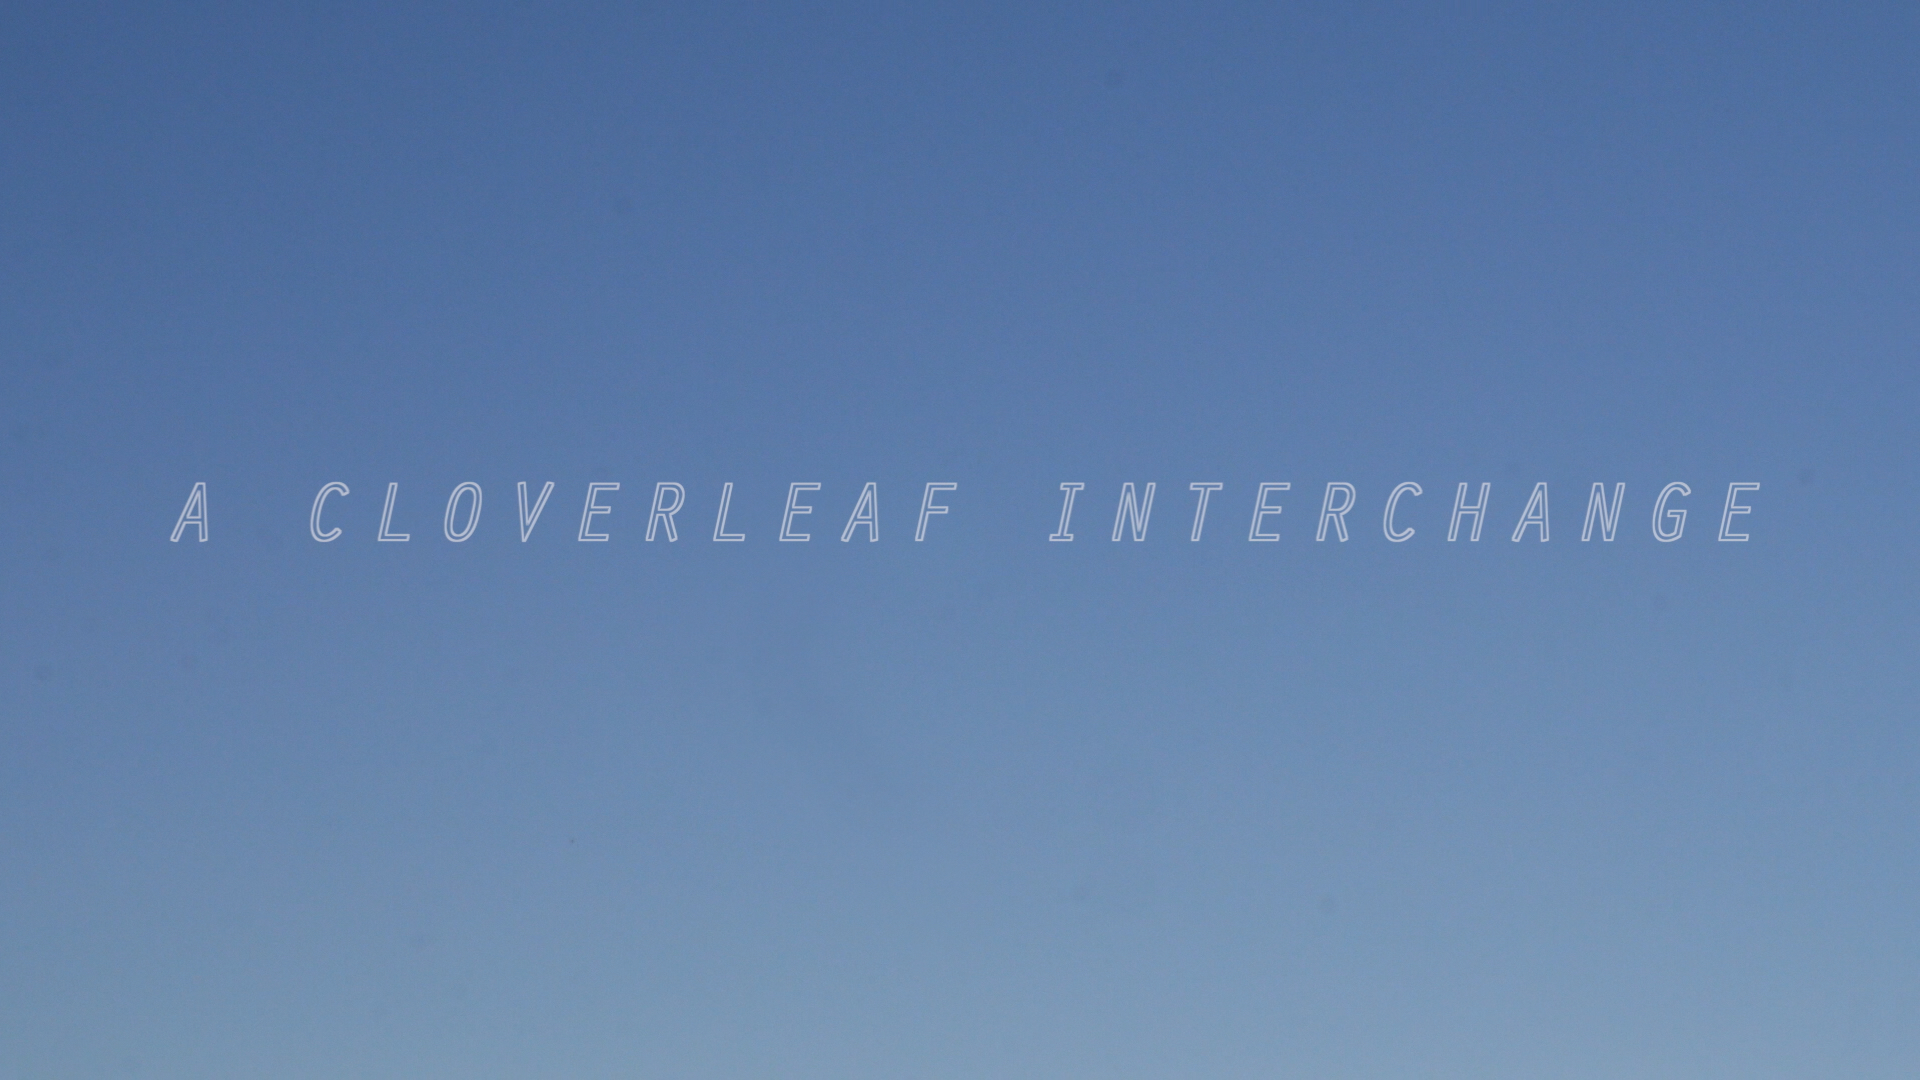   A Cloverleaf Interchange  (2017) is a work for video and live performer.  It has been performed at Mills College, Pro Arts Gallery, Aurora Providence, and the Lightfield Film Festival.  SYNOPSIS: A driver and passenger misread a highway sign, spark